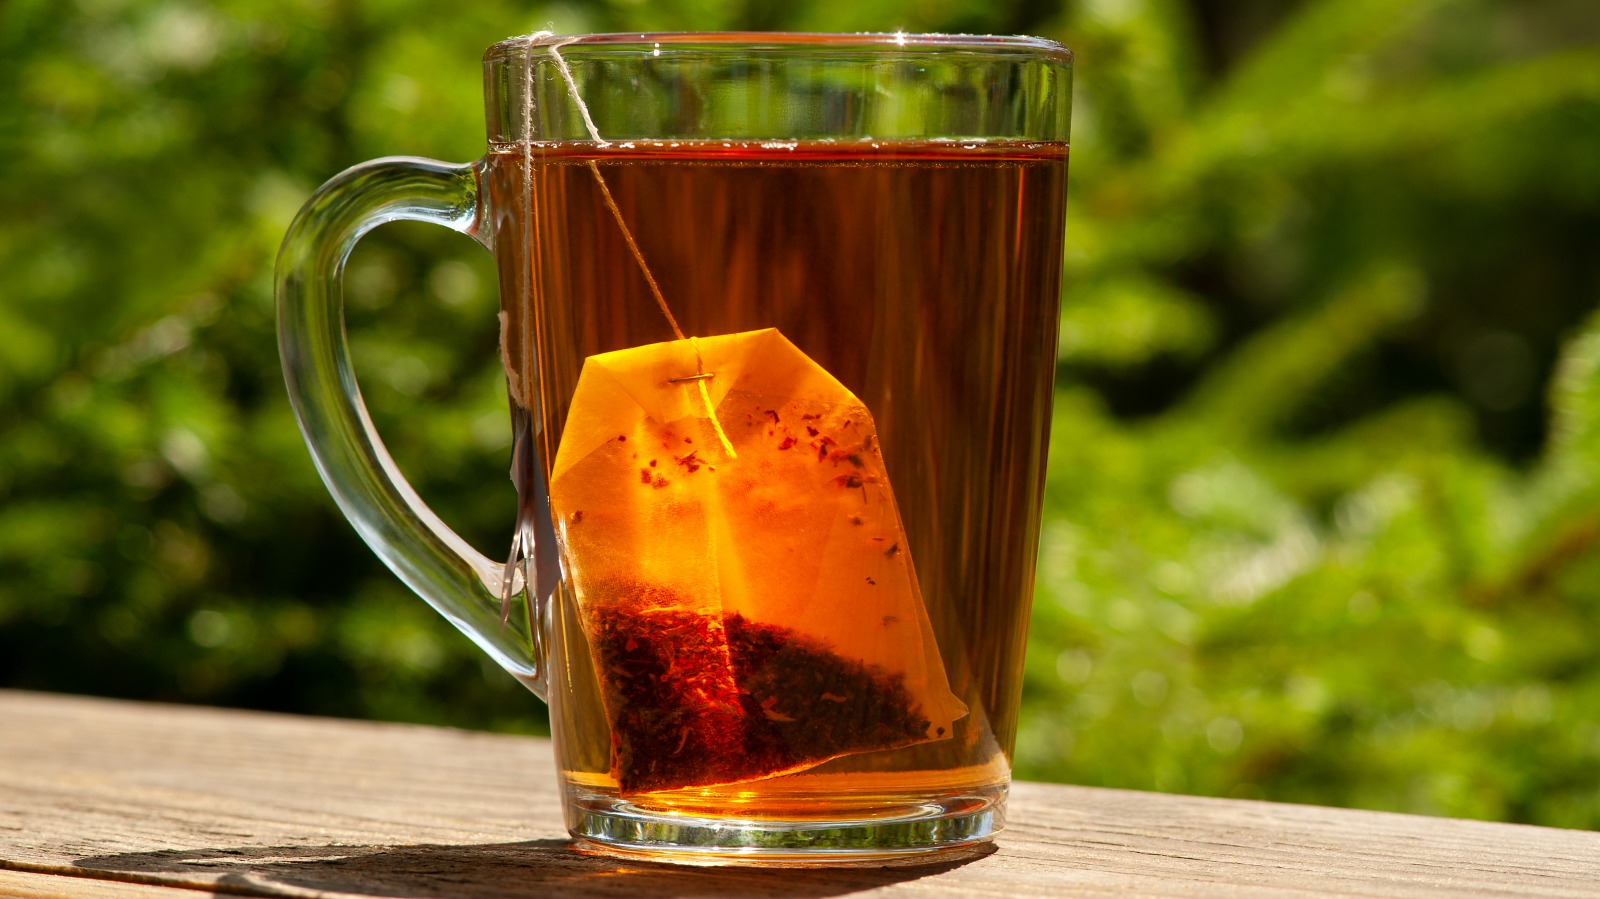 Is It Safe To Brew and Drink Sun Tea?